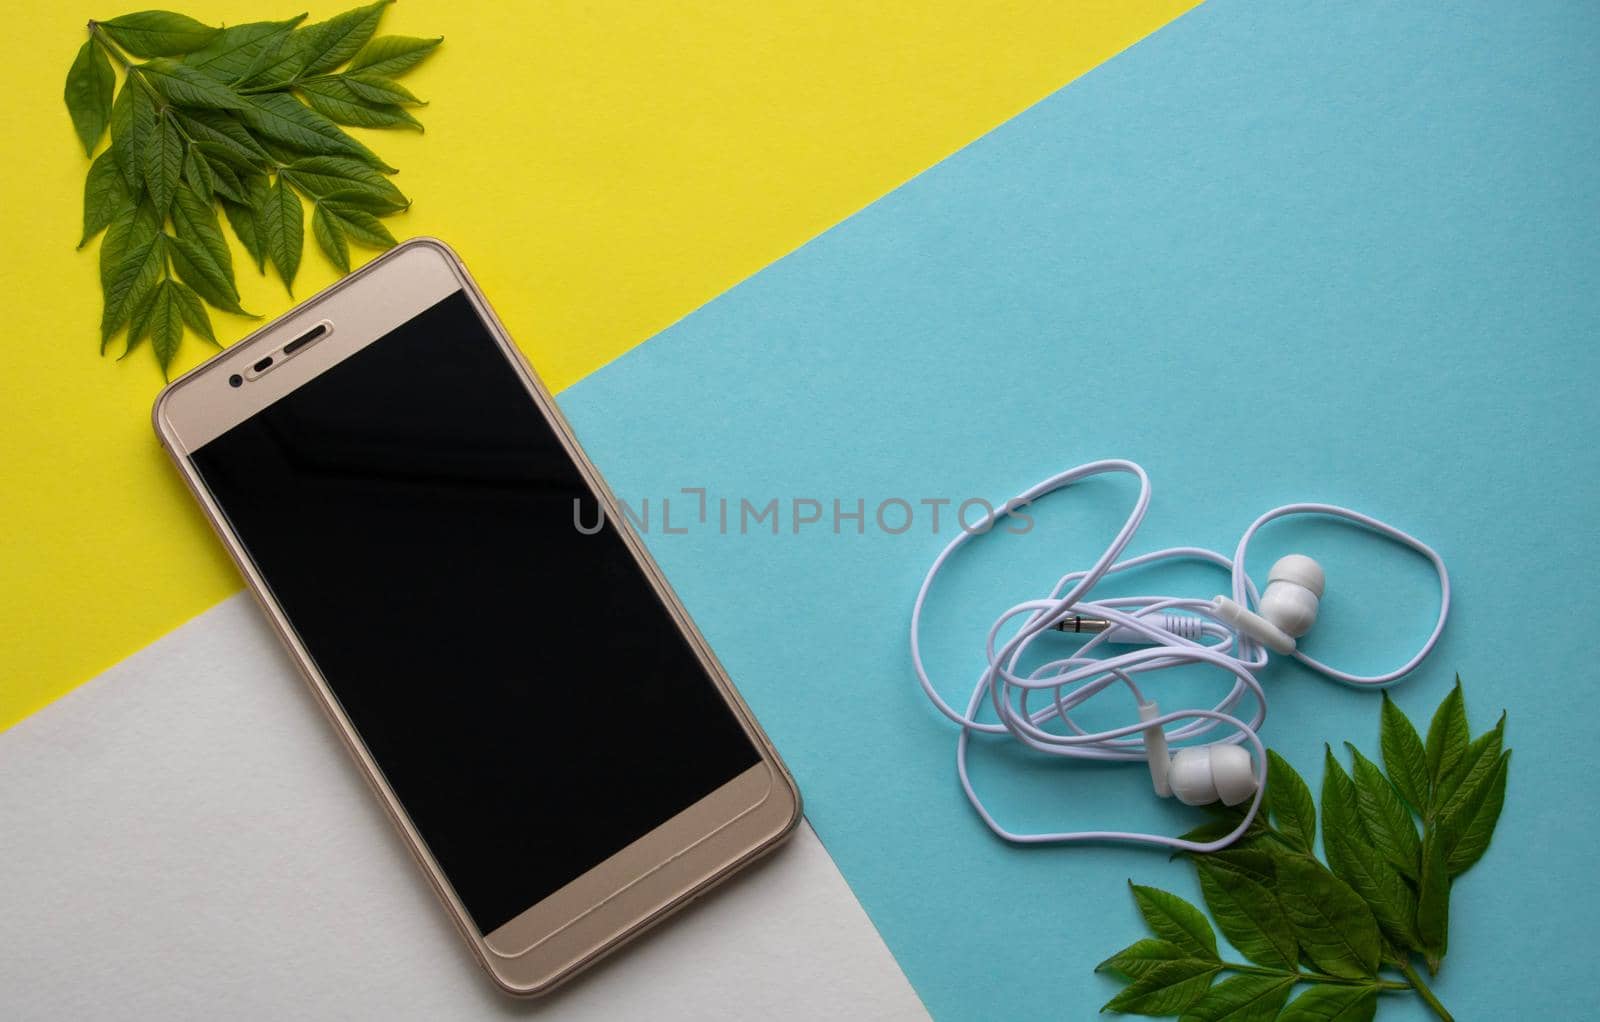 A Golden smartphone with a blank screen and headphones isolated on a white yellow and blue background with green leaves.